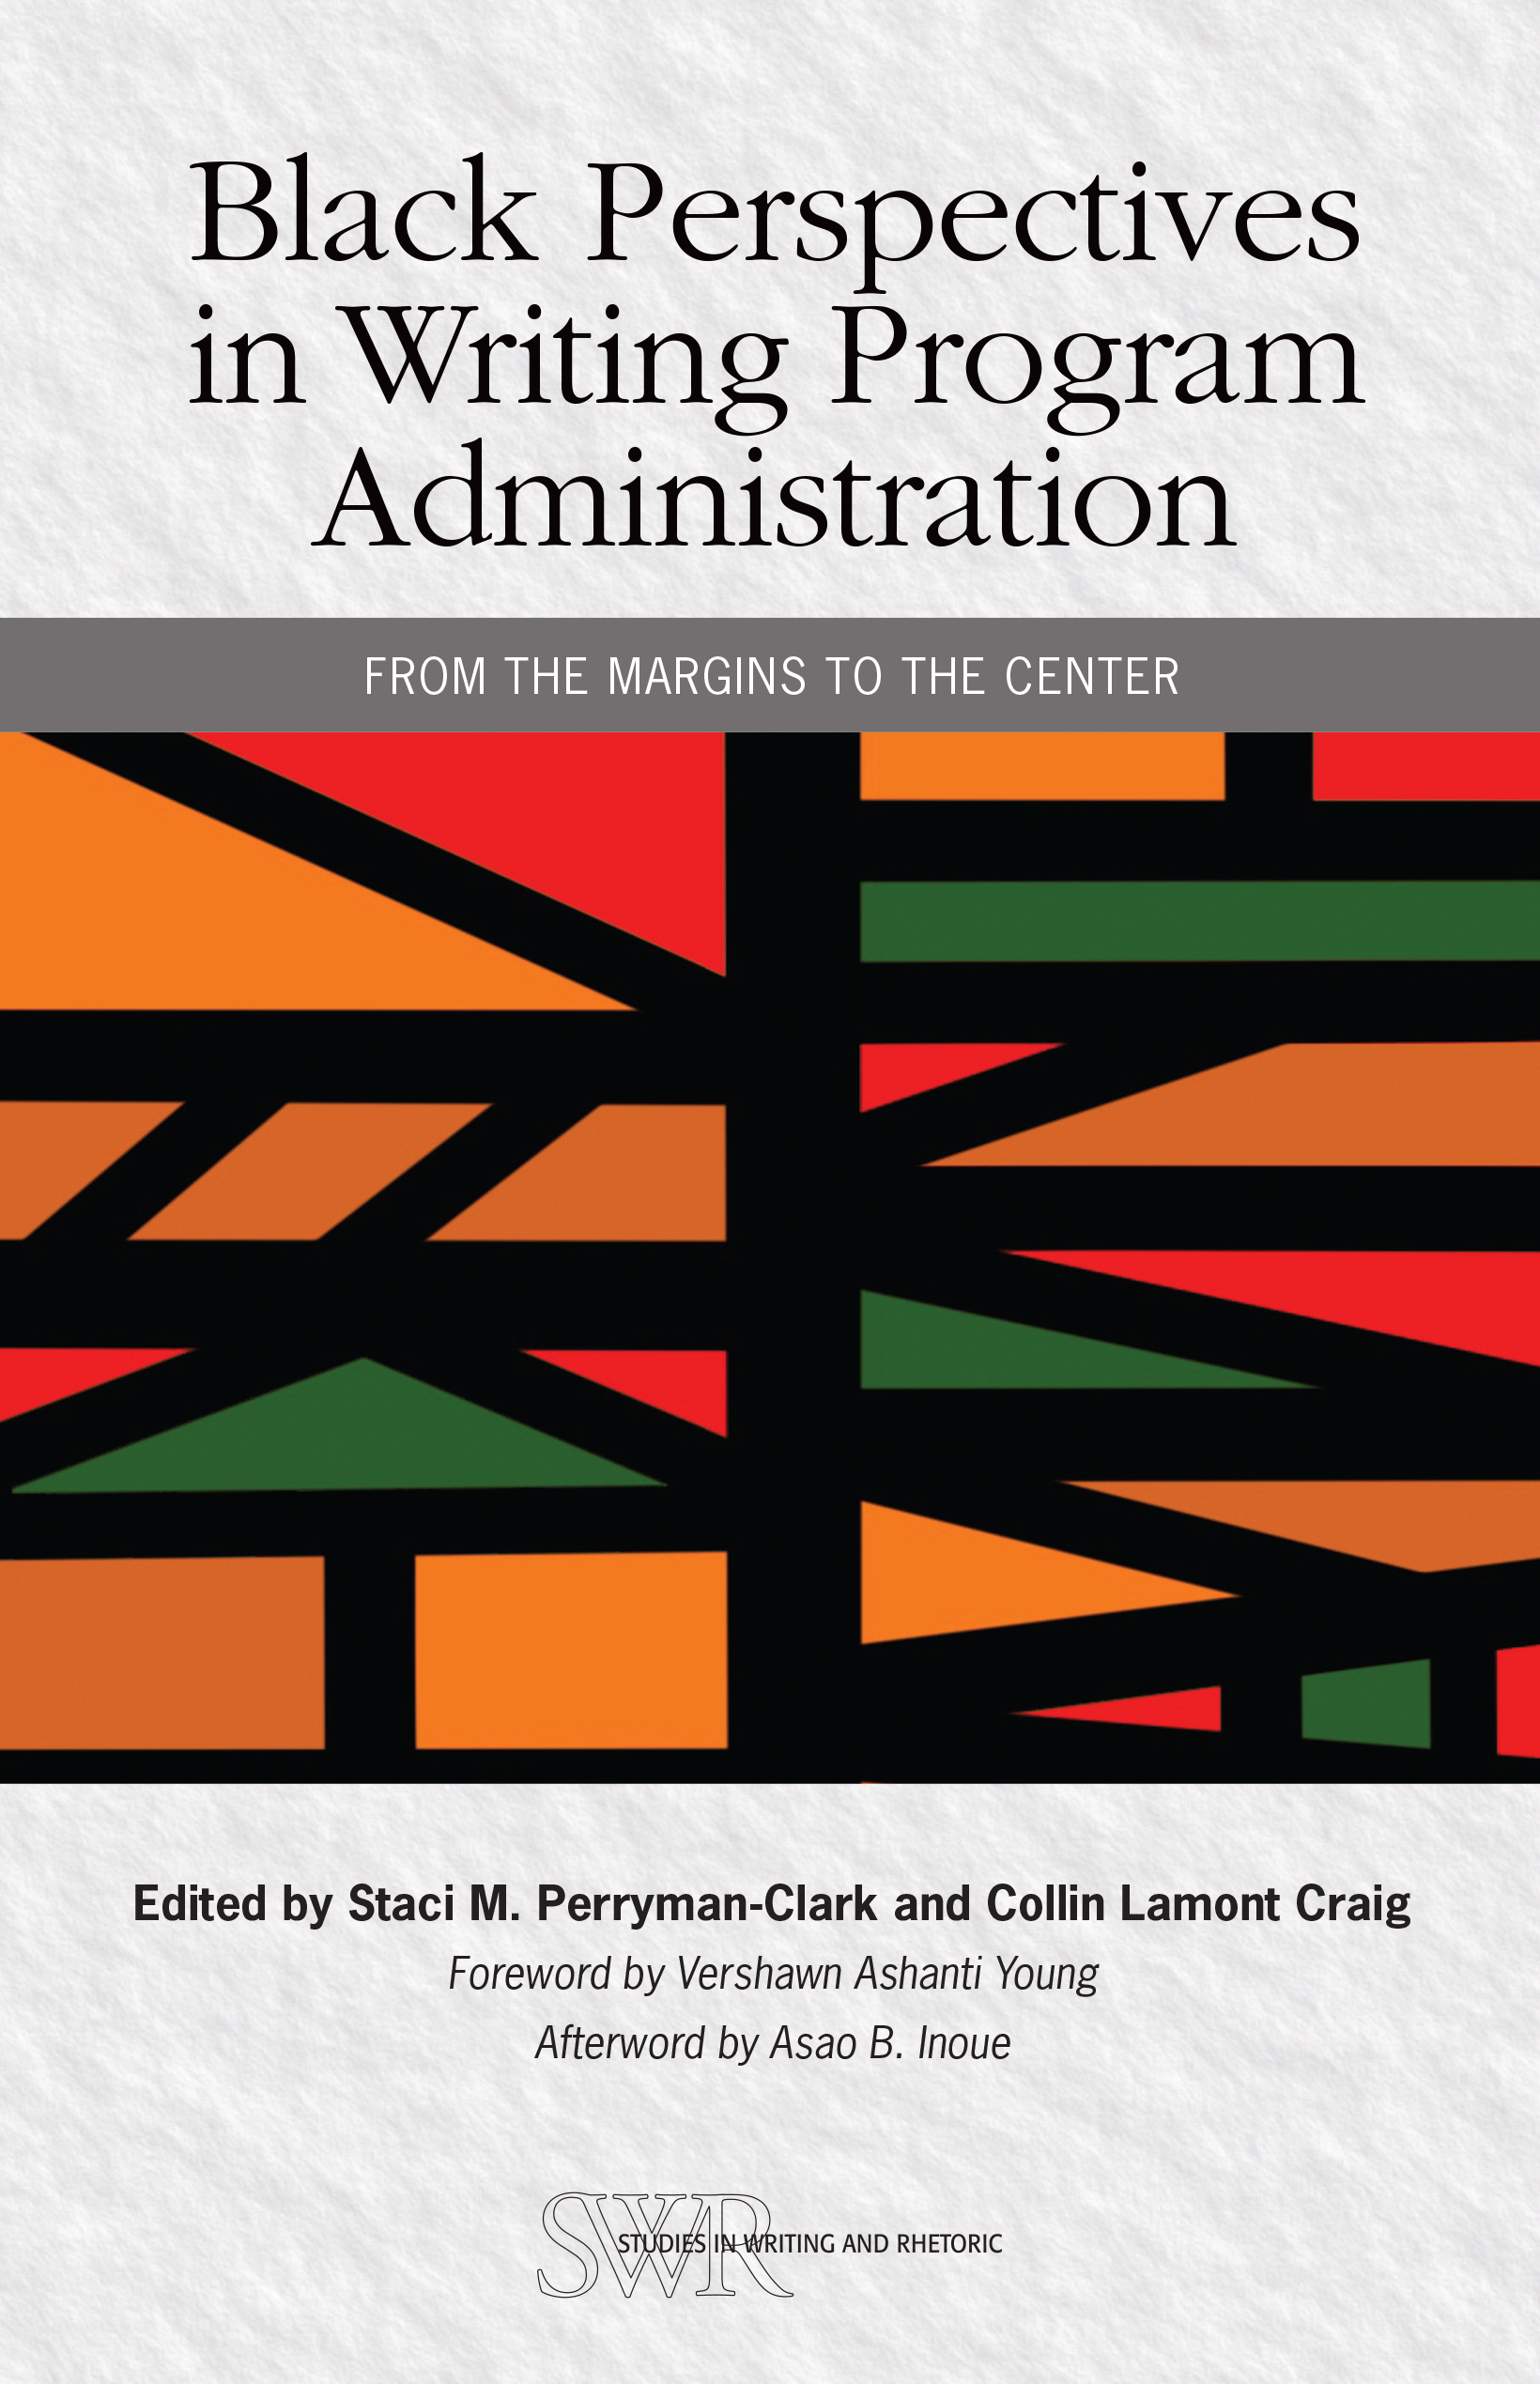 image of Black Perspectives in Writing Program Administration